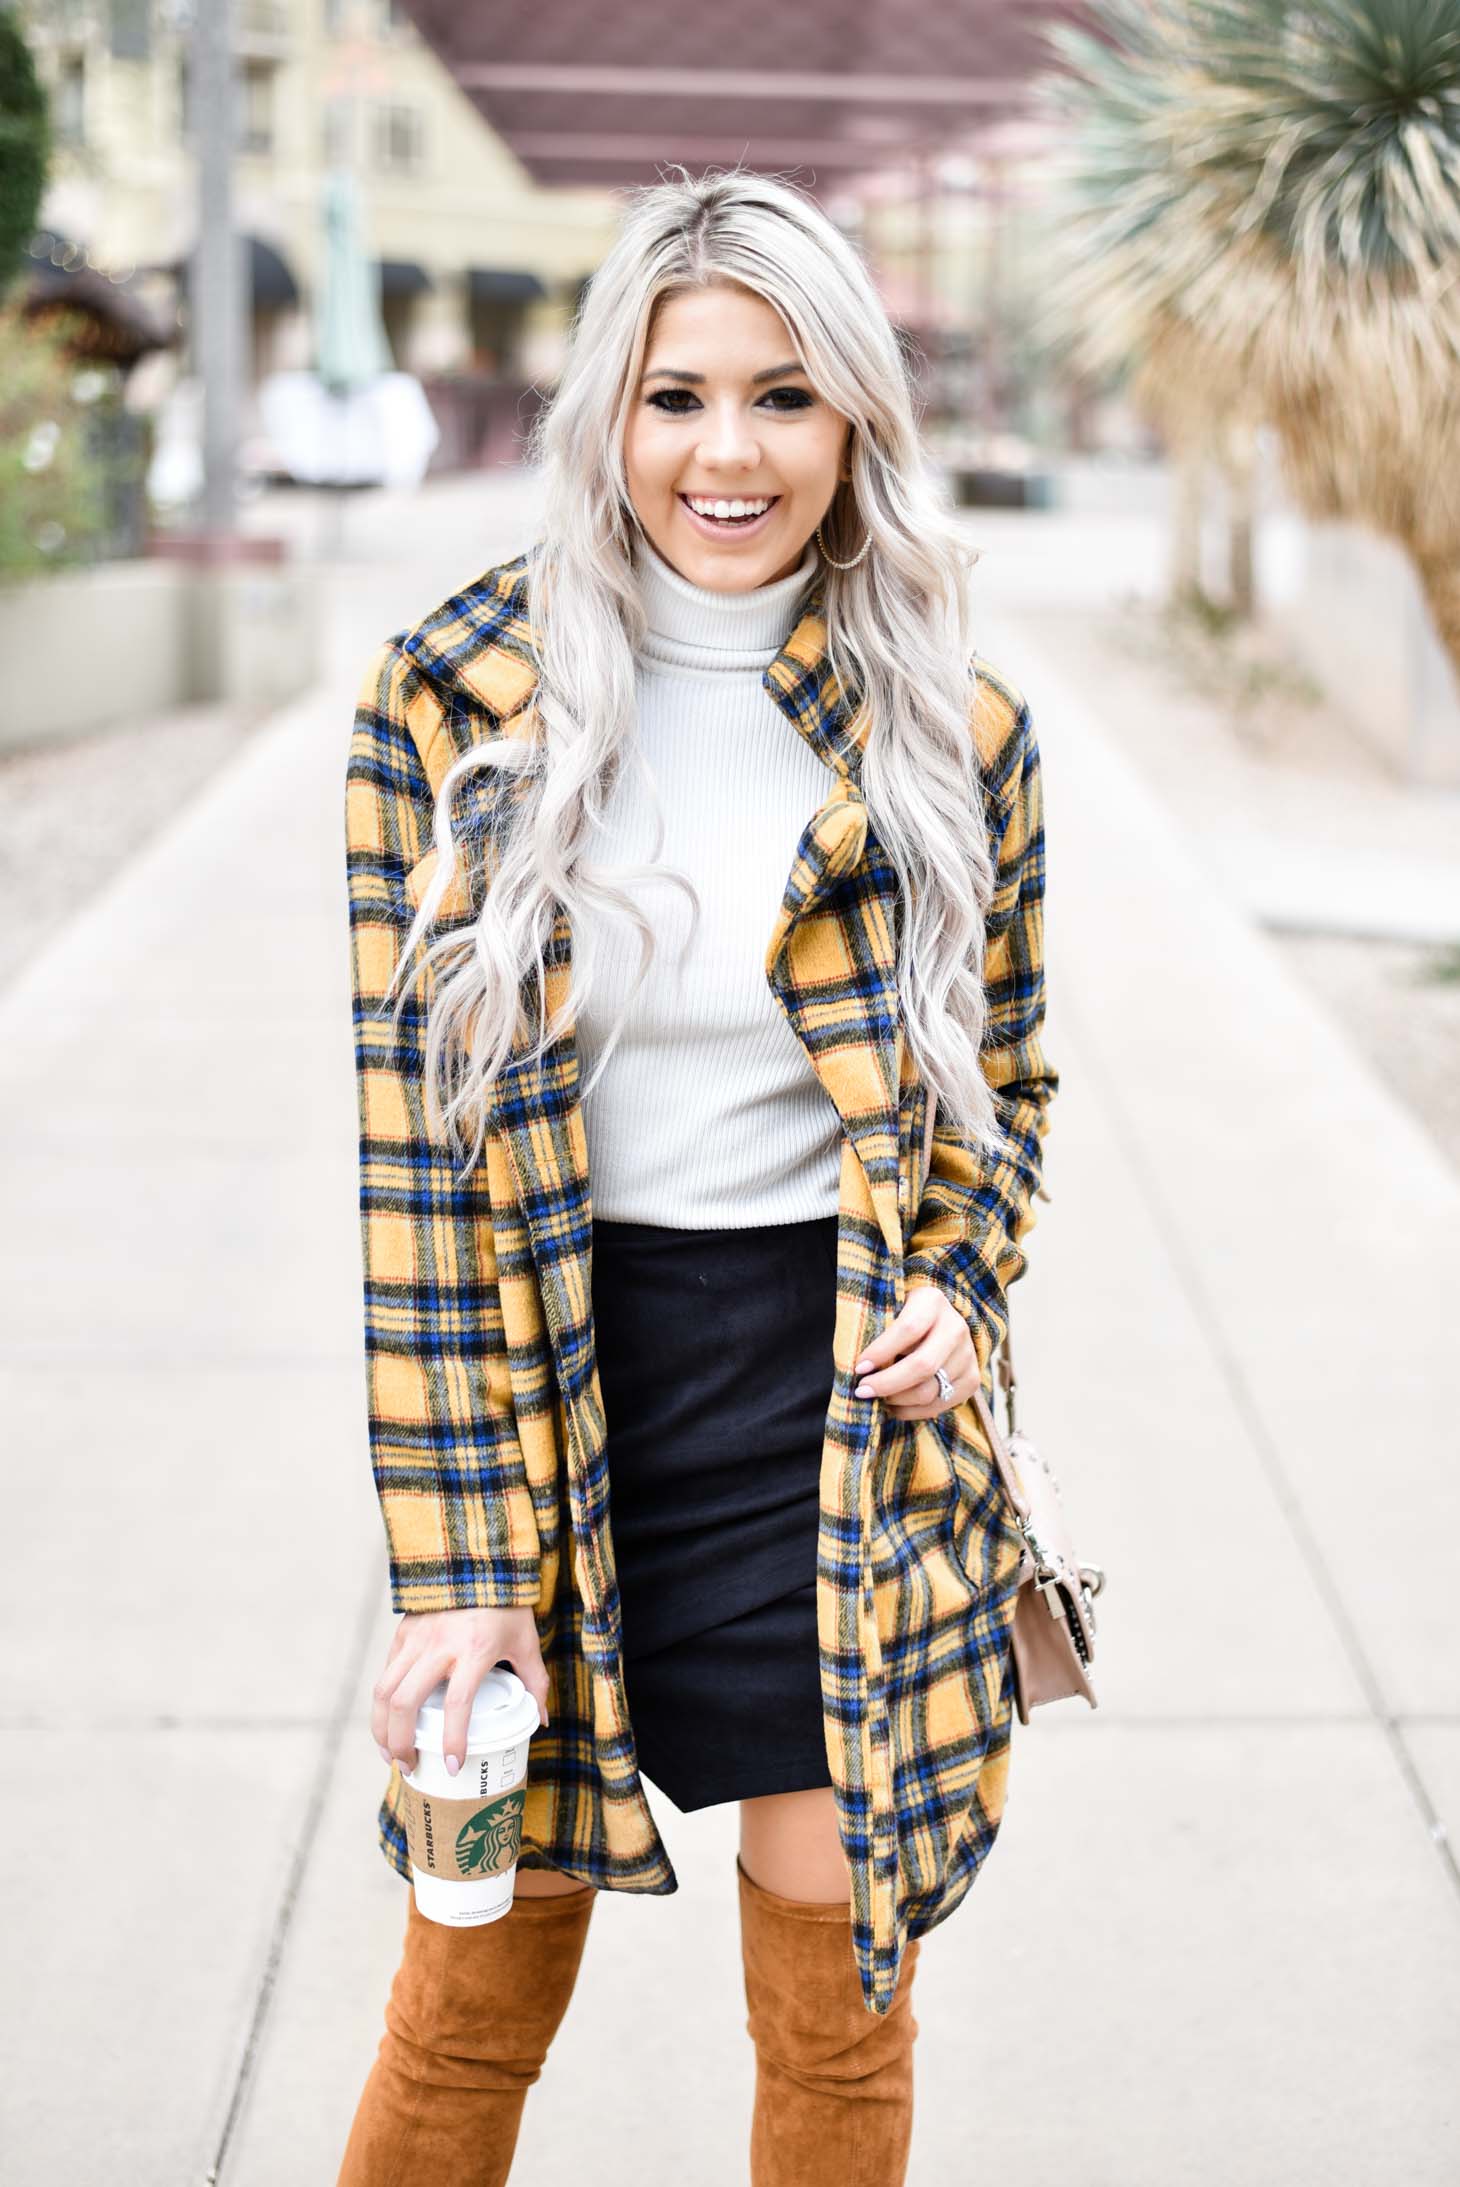 Erin Elizabeth of Wink and a Twirl shares this fabulous plaid coat from Shop Priceless